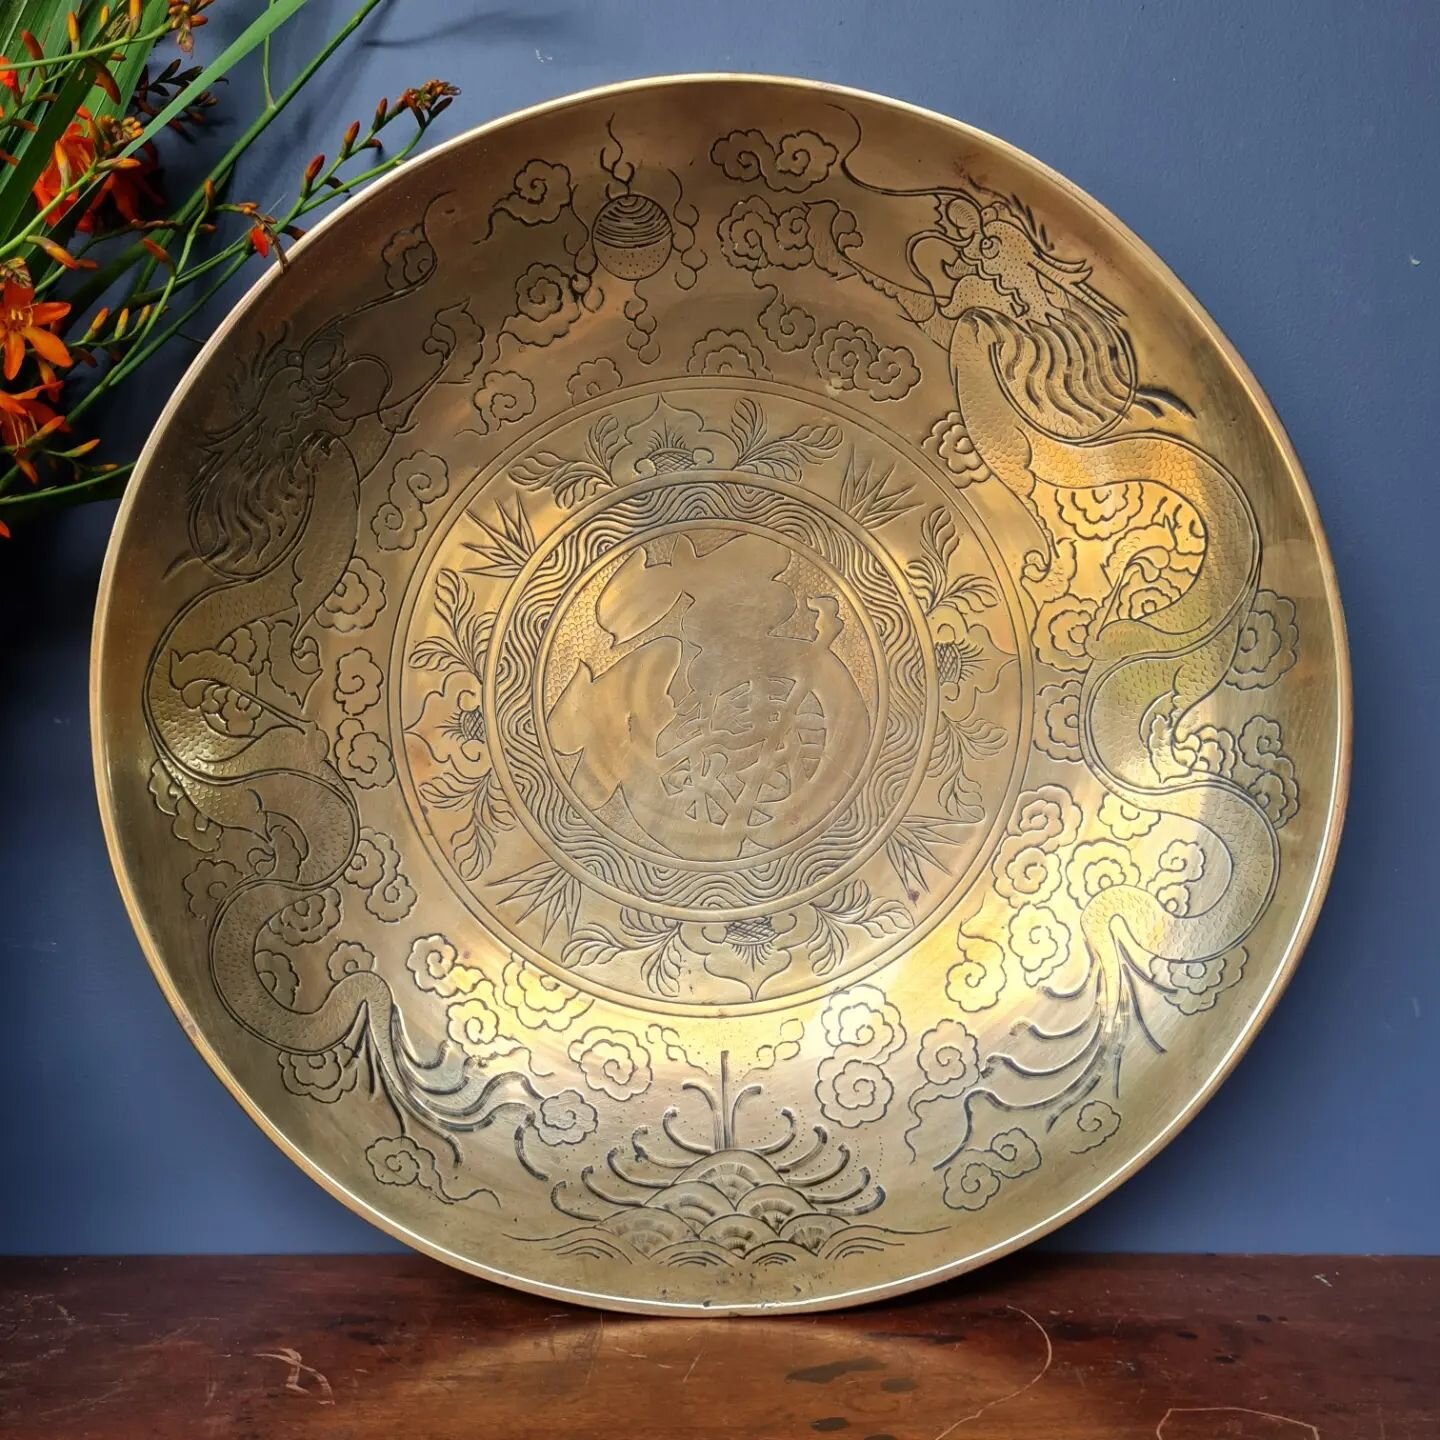 Large oriental Brass charger. Good heavy brass. Great as a fruit bowl.
It measures 425mm across $120
Postage $18.70 Australia wide.